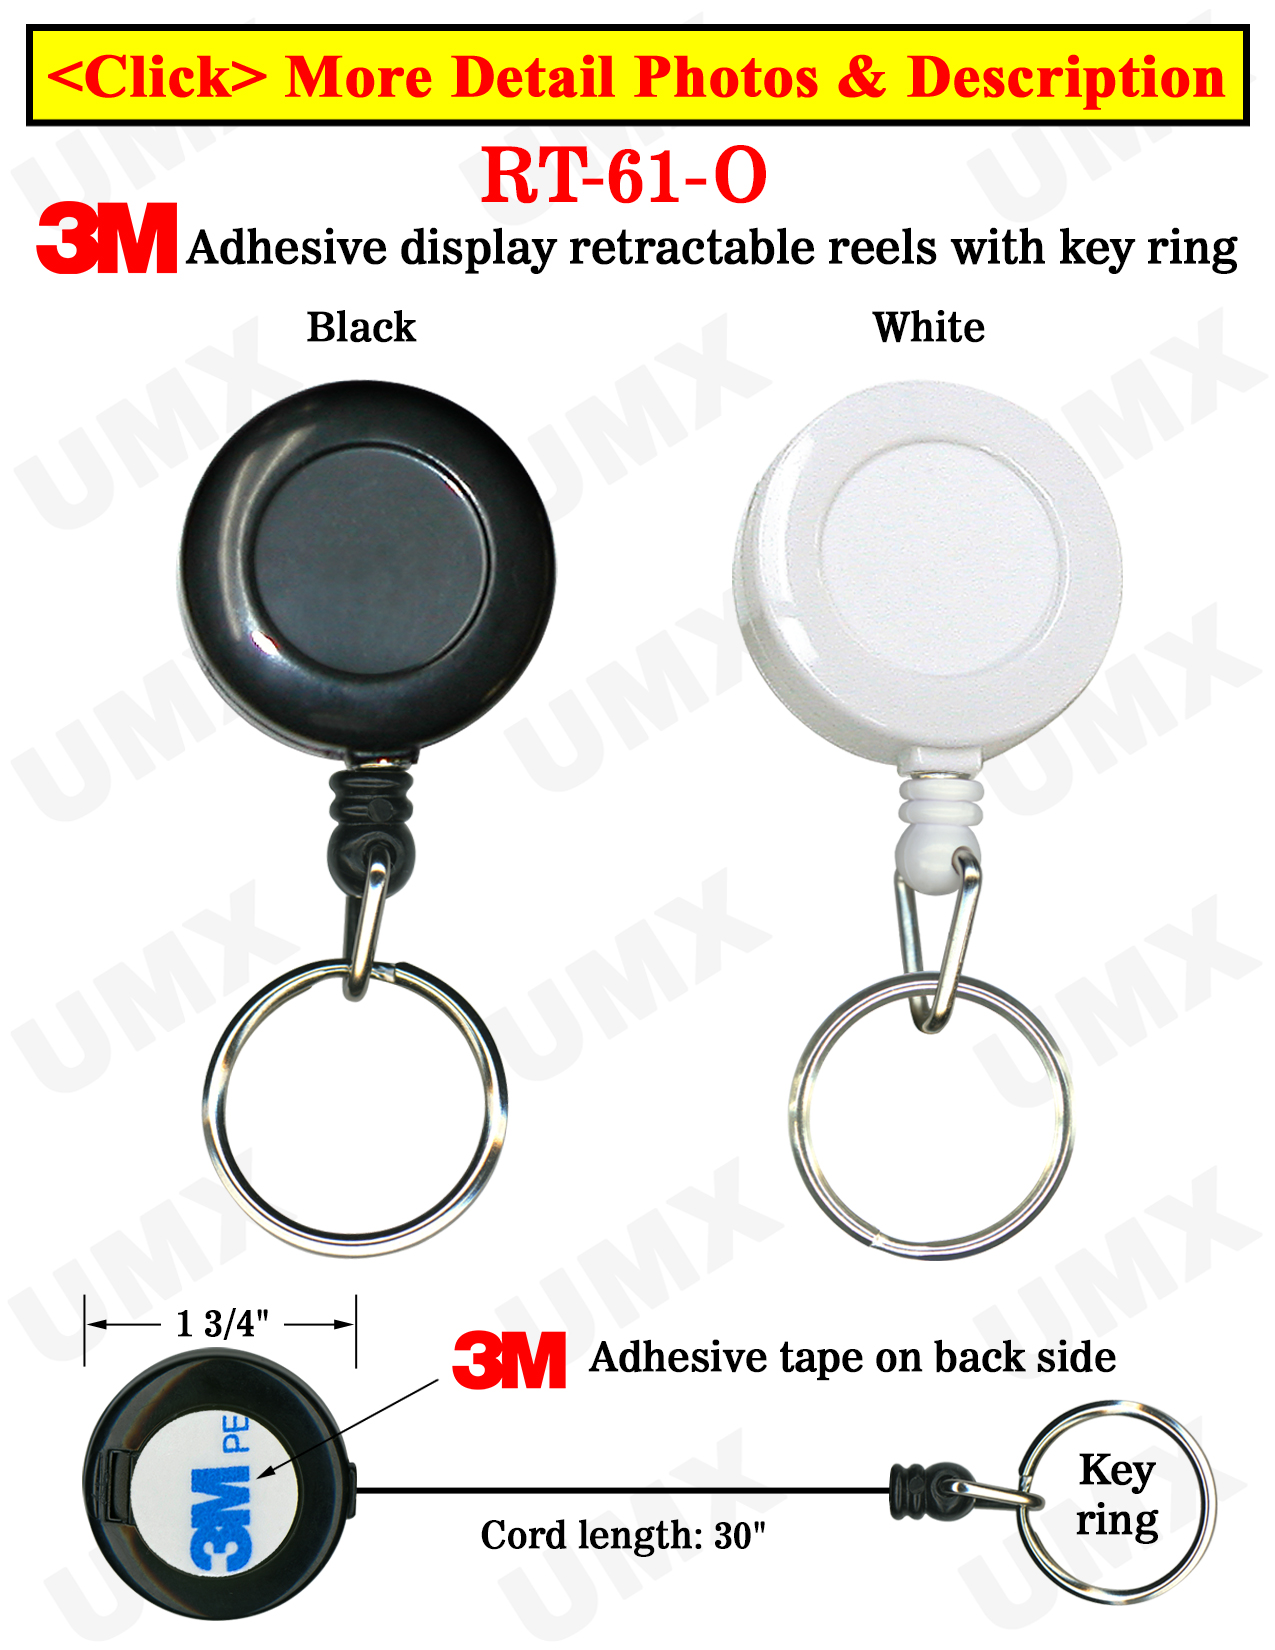 http://www.usalanyards.com/a/making/hardware/buckle/safety/RT-61-3M/adhesive-display-retractable-reels-rt-61-o-5.jpg